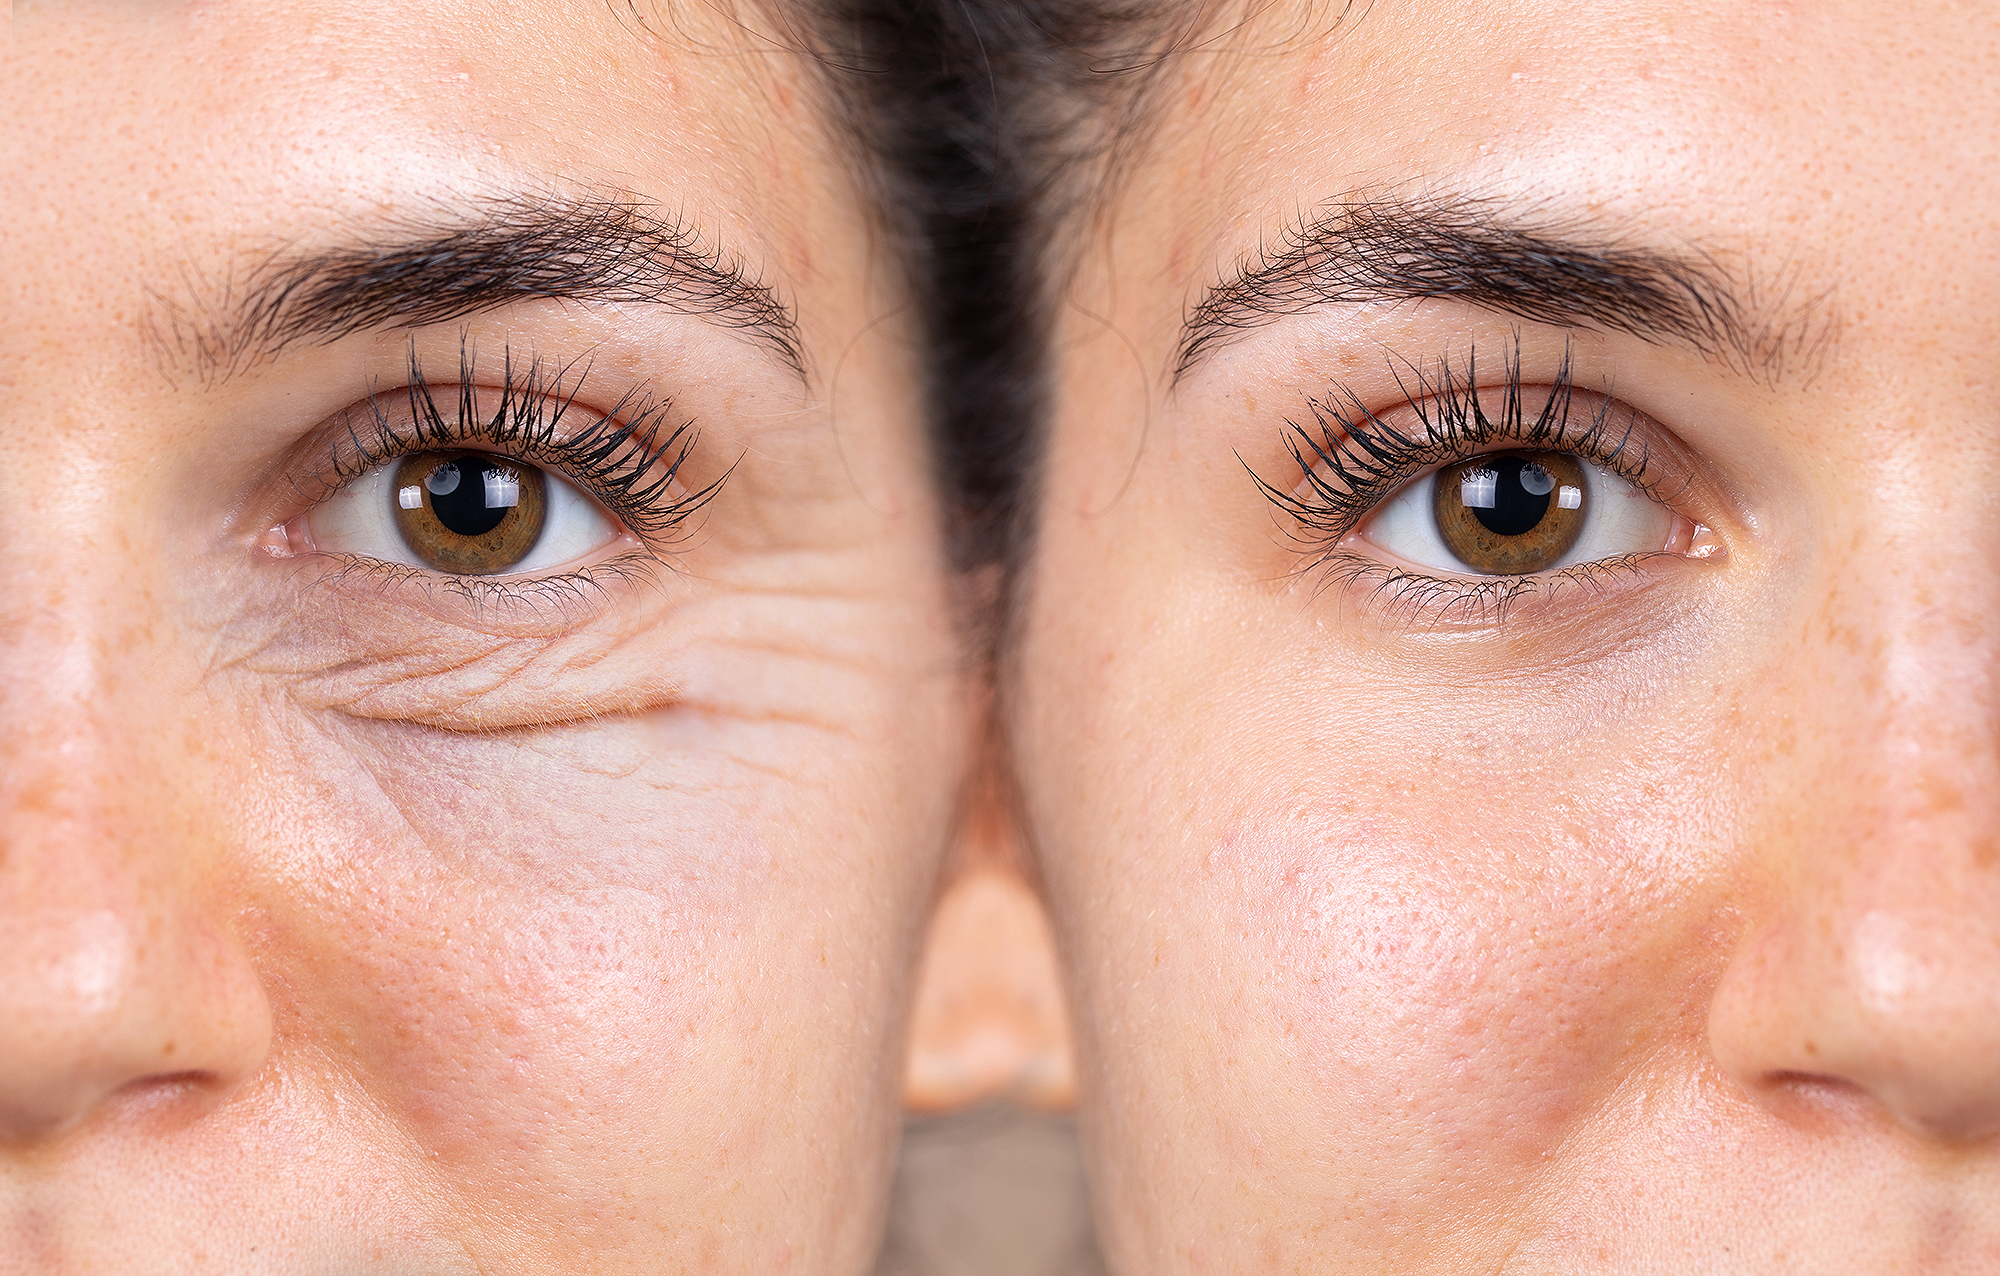 MIT Just Helped Develop a Product to Diminish Under Eye Bags